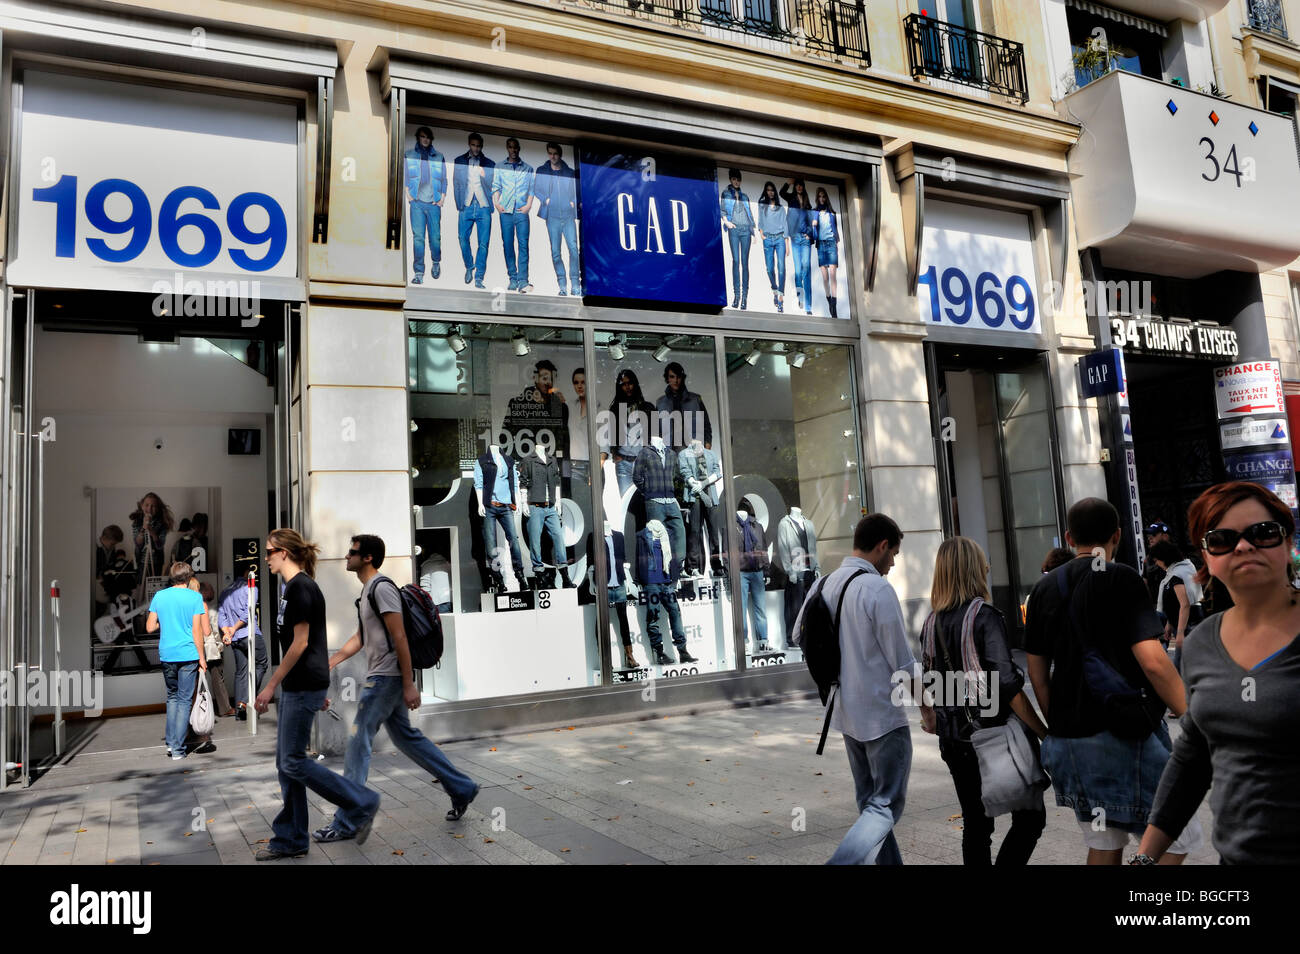 Paris, France, Crowd People Walking Clothes Shopping, Storefront, 'Gap Store' on Avenue Champs-Elysees, Parisian street scene, fast fashion, streets Stock Photo